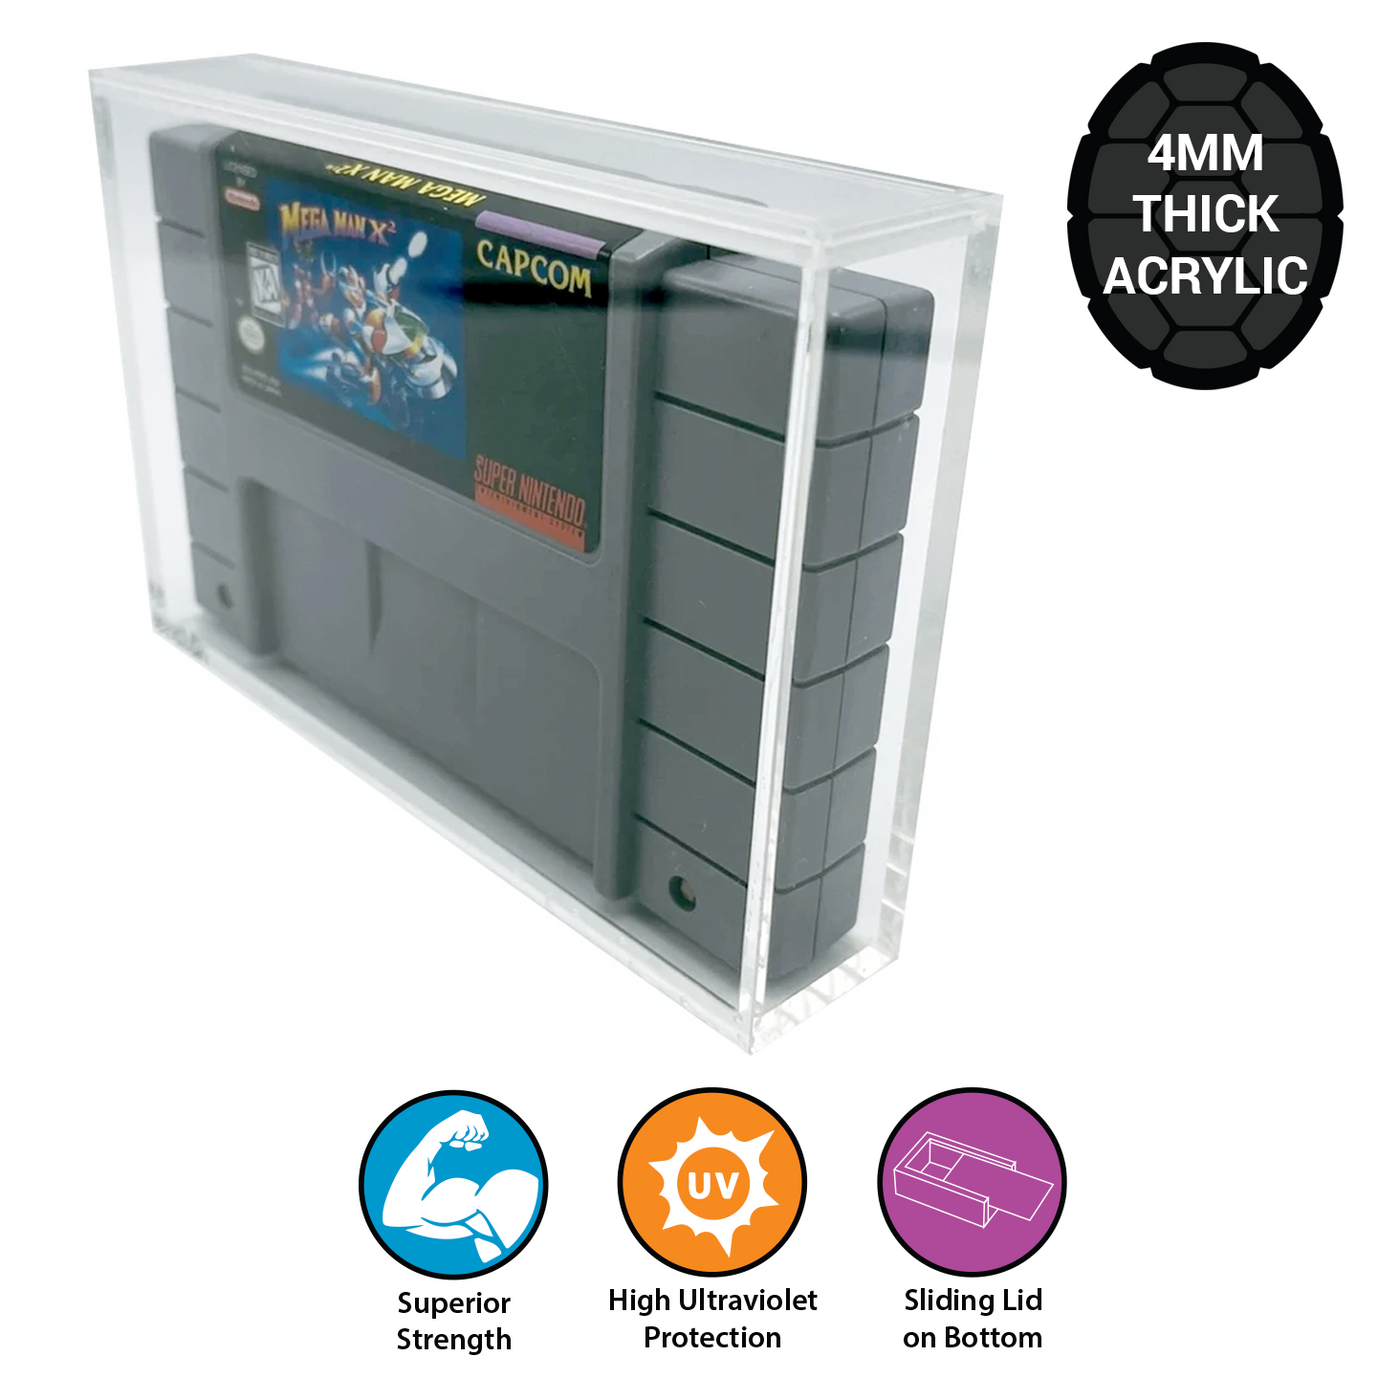 VIDEO GAME ACRYLIC Case for SNES Game Cartidge, 4mm thick (UV Resistant & Slide Bottom)